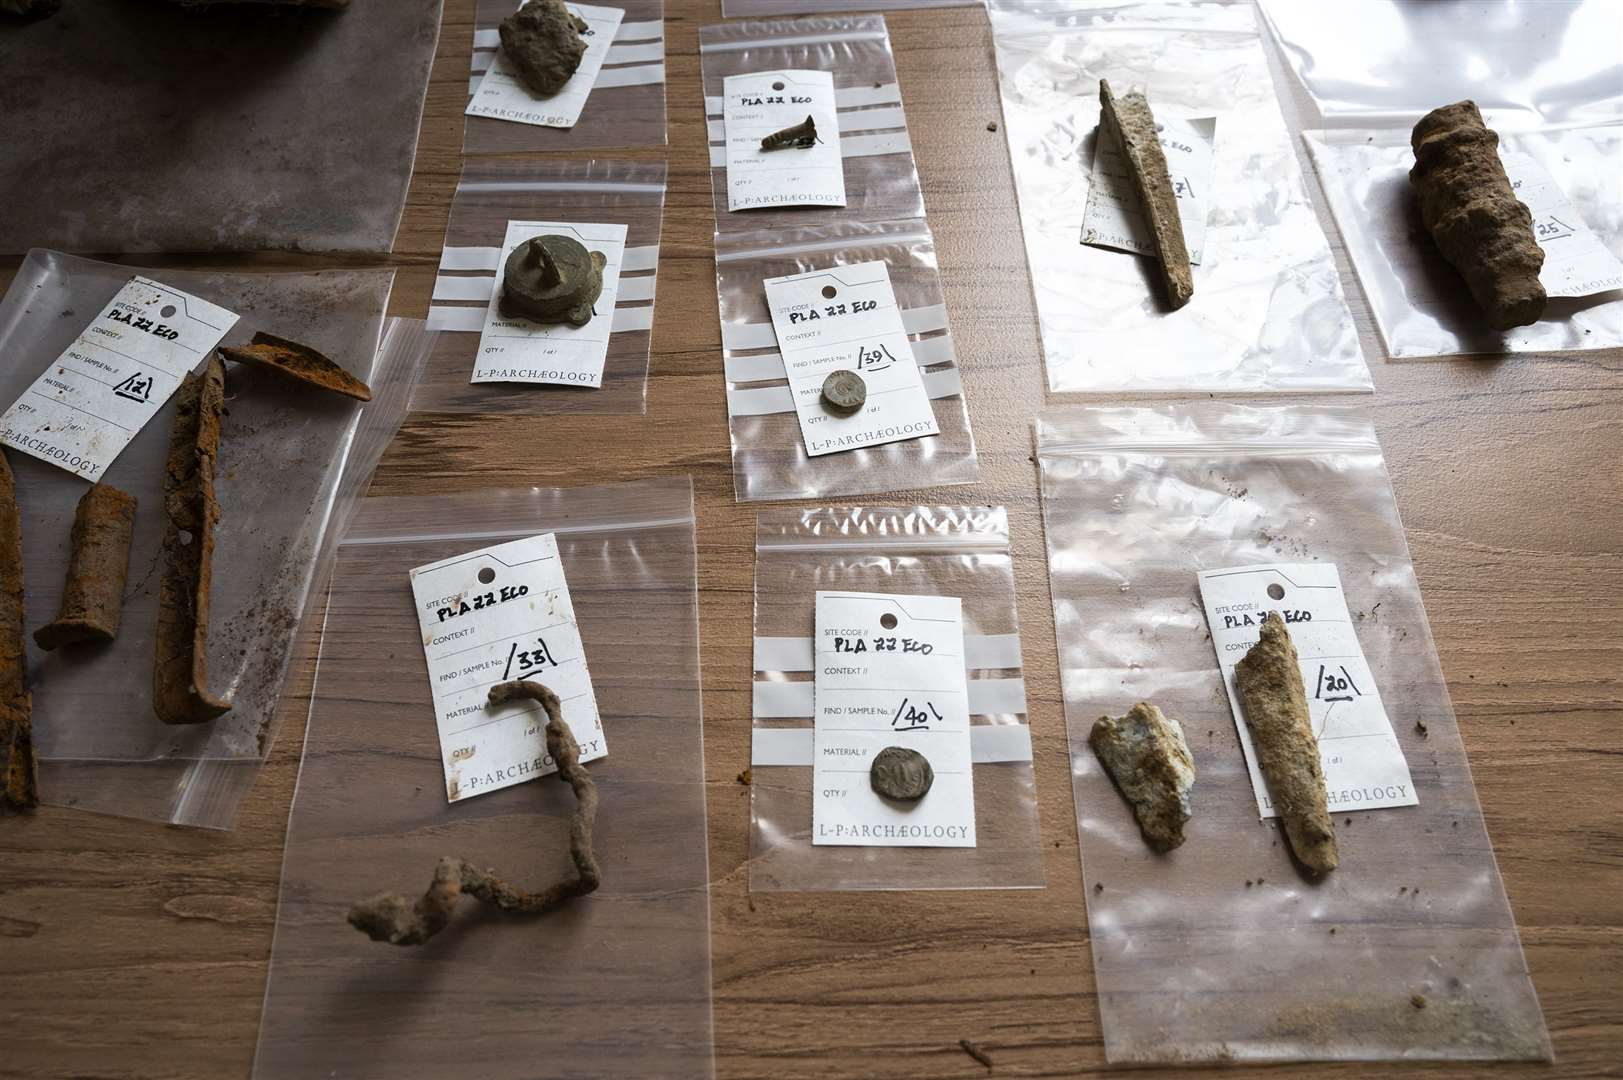 Finds from the first two days of excavation (Chris Van Houts/Waterloo Uncovered)